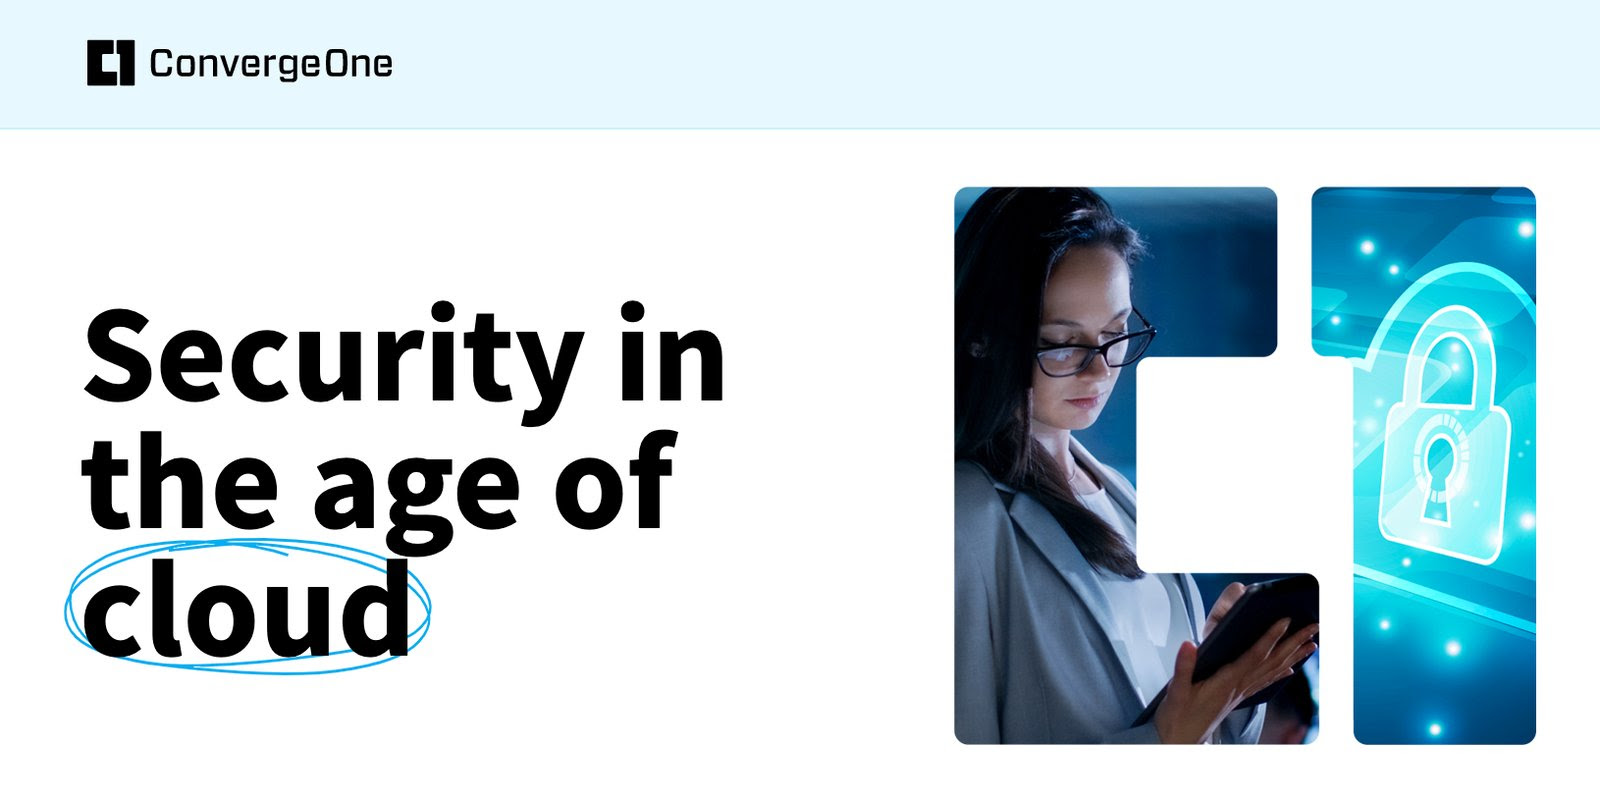 [Security Magazine Article] The Next Frontier of Security in the Age of Cloud